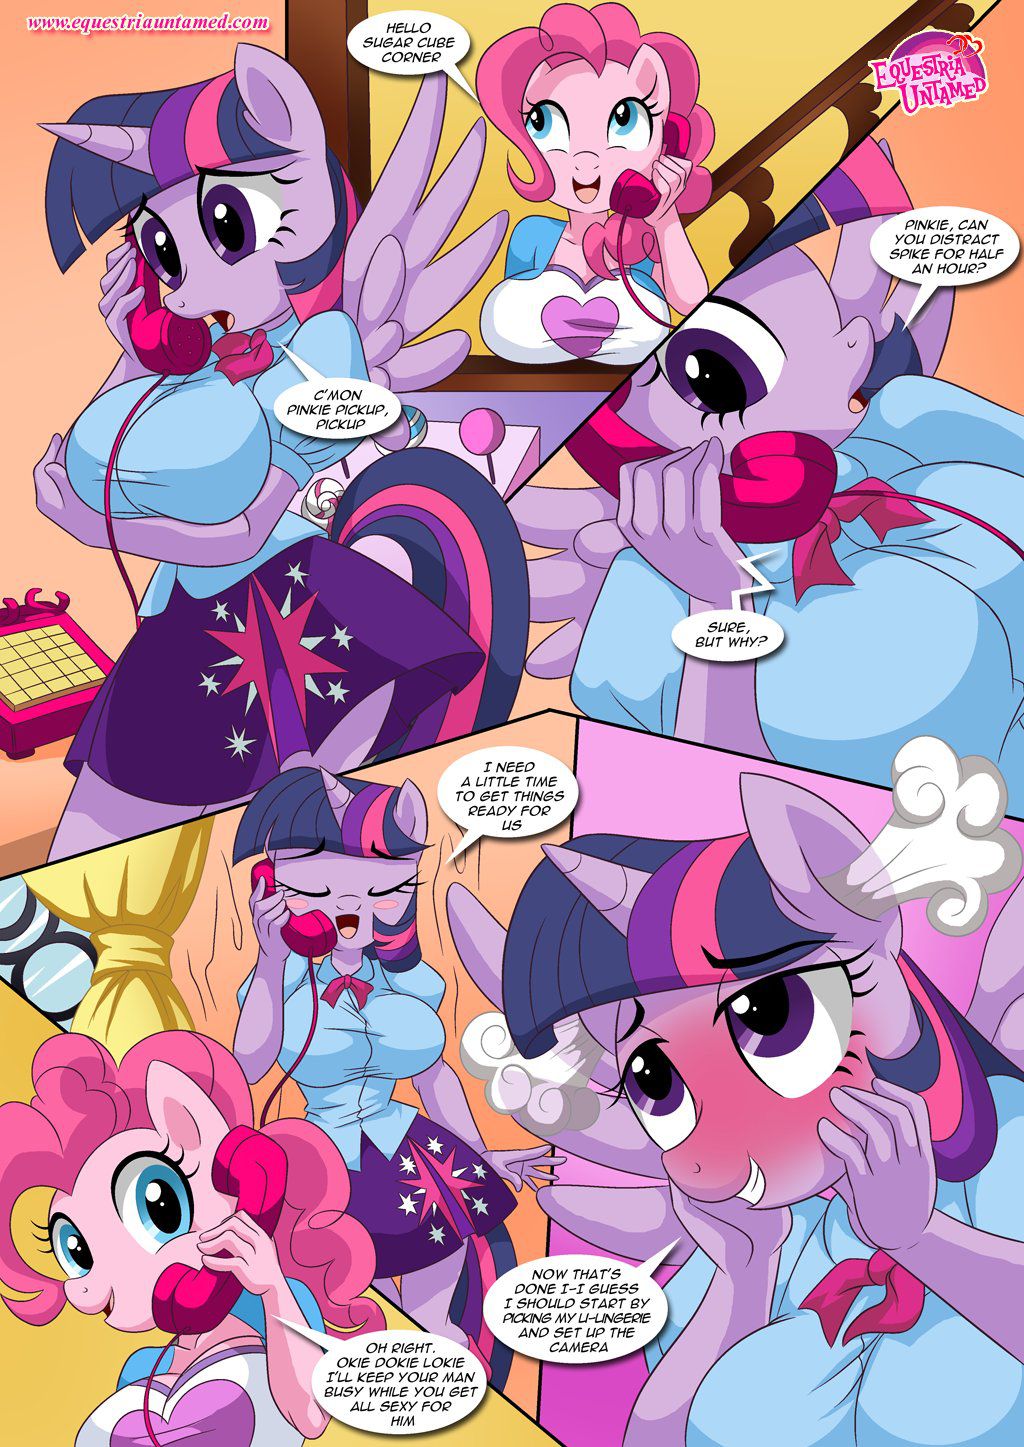 [Palcomix] Sex Ed with Miss Twilight Sparkle (My Little Pony Friendship Is Magic) [Ongoing] 11